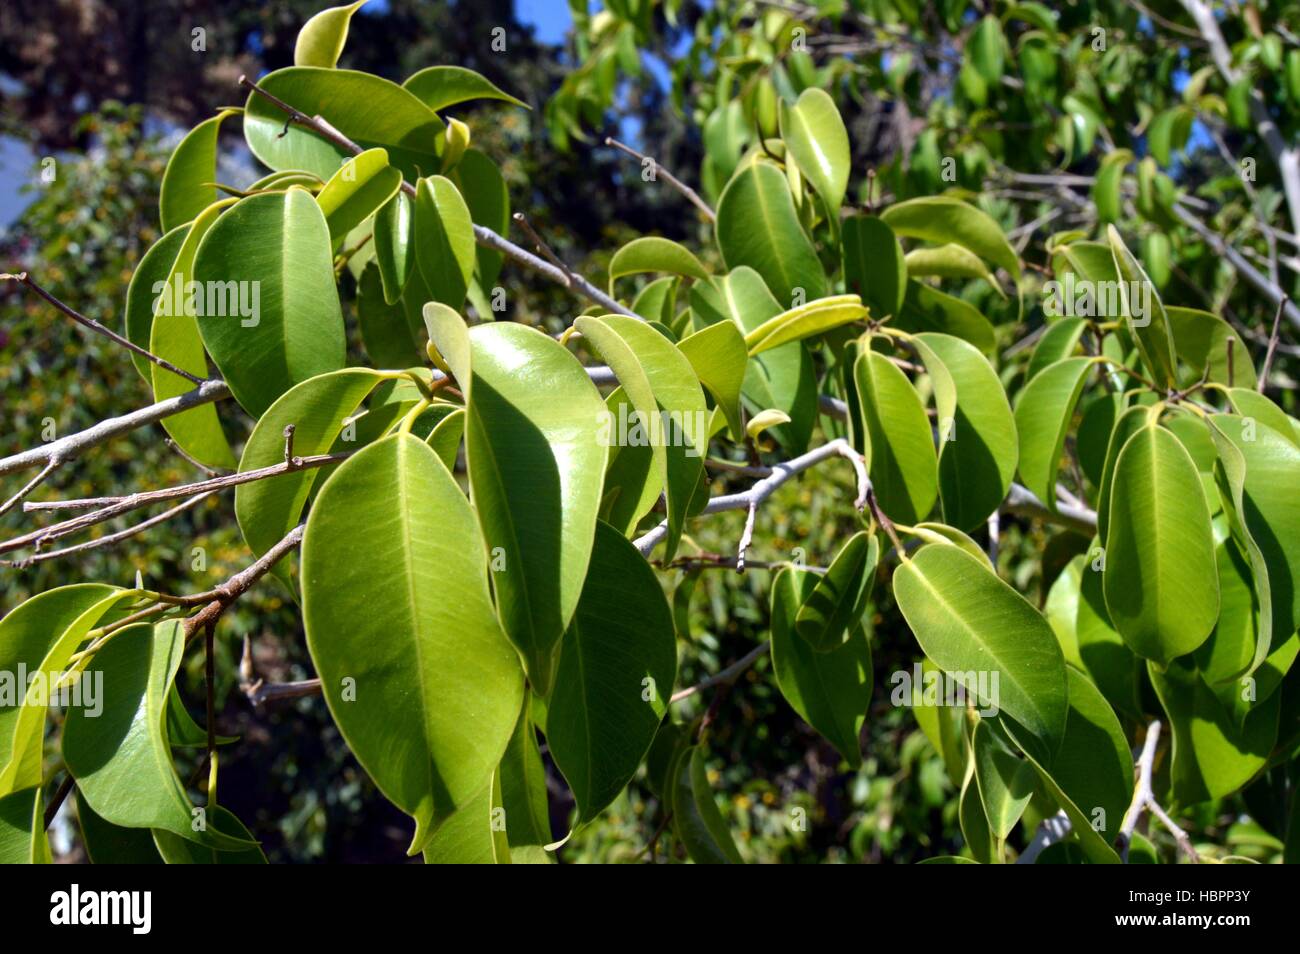 Leaves of a fat plant of green color. Stock Photo